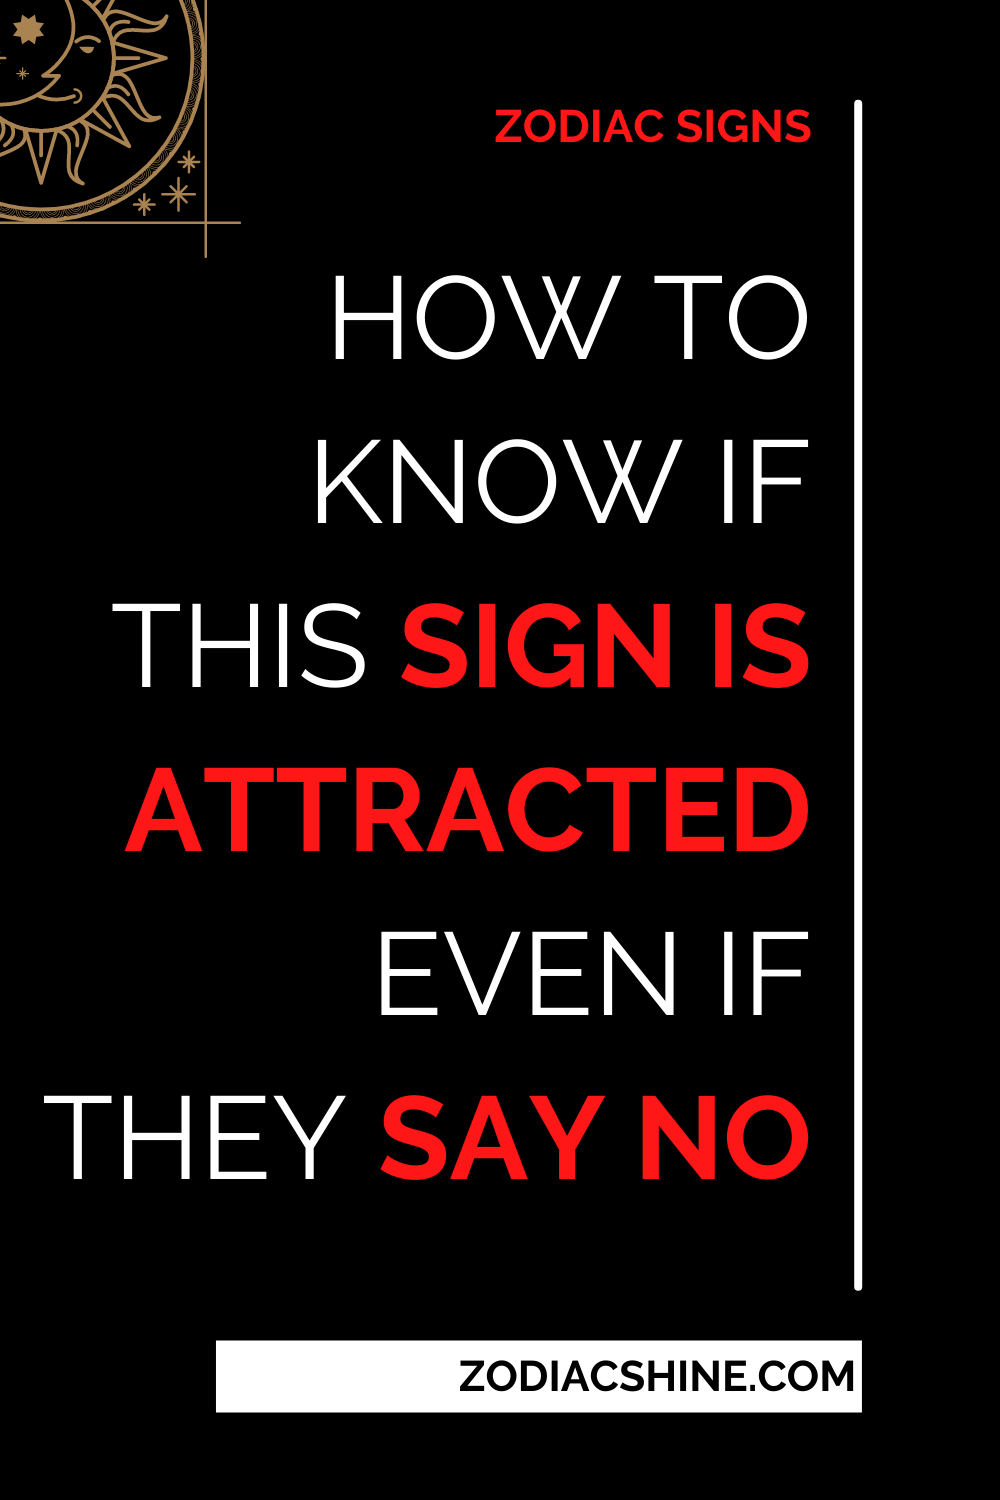 How To Know If This Sign Is Attracted Even If They Say No